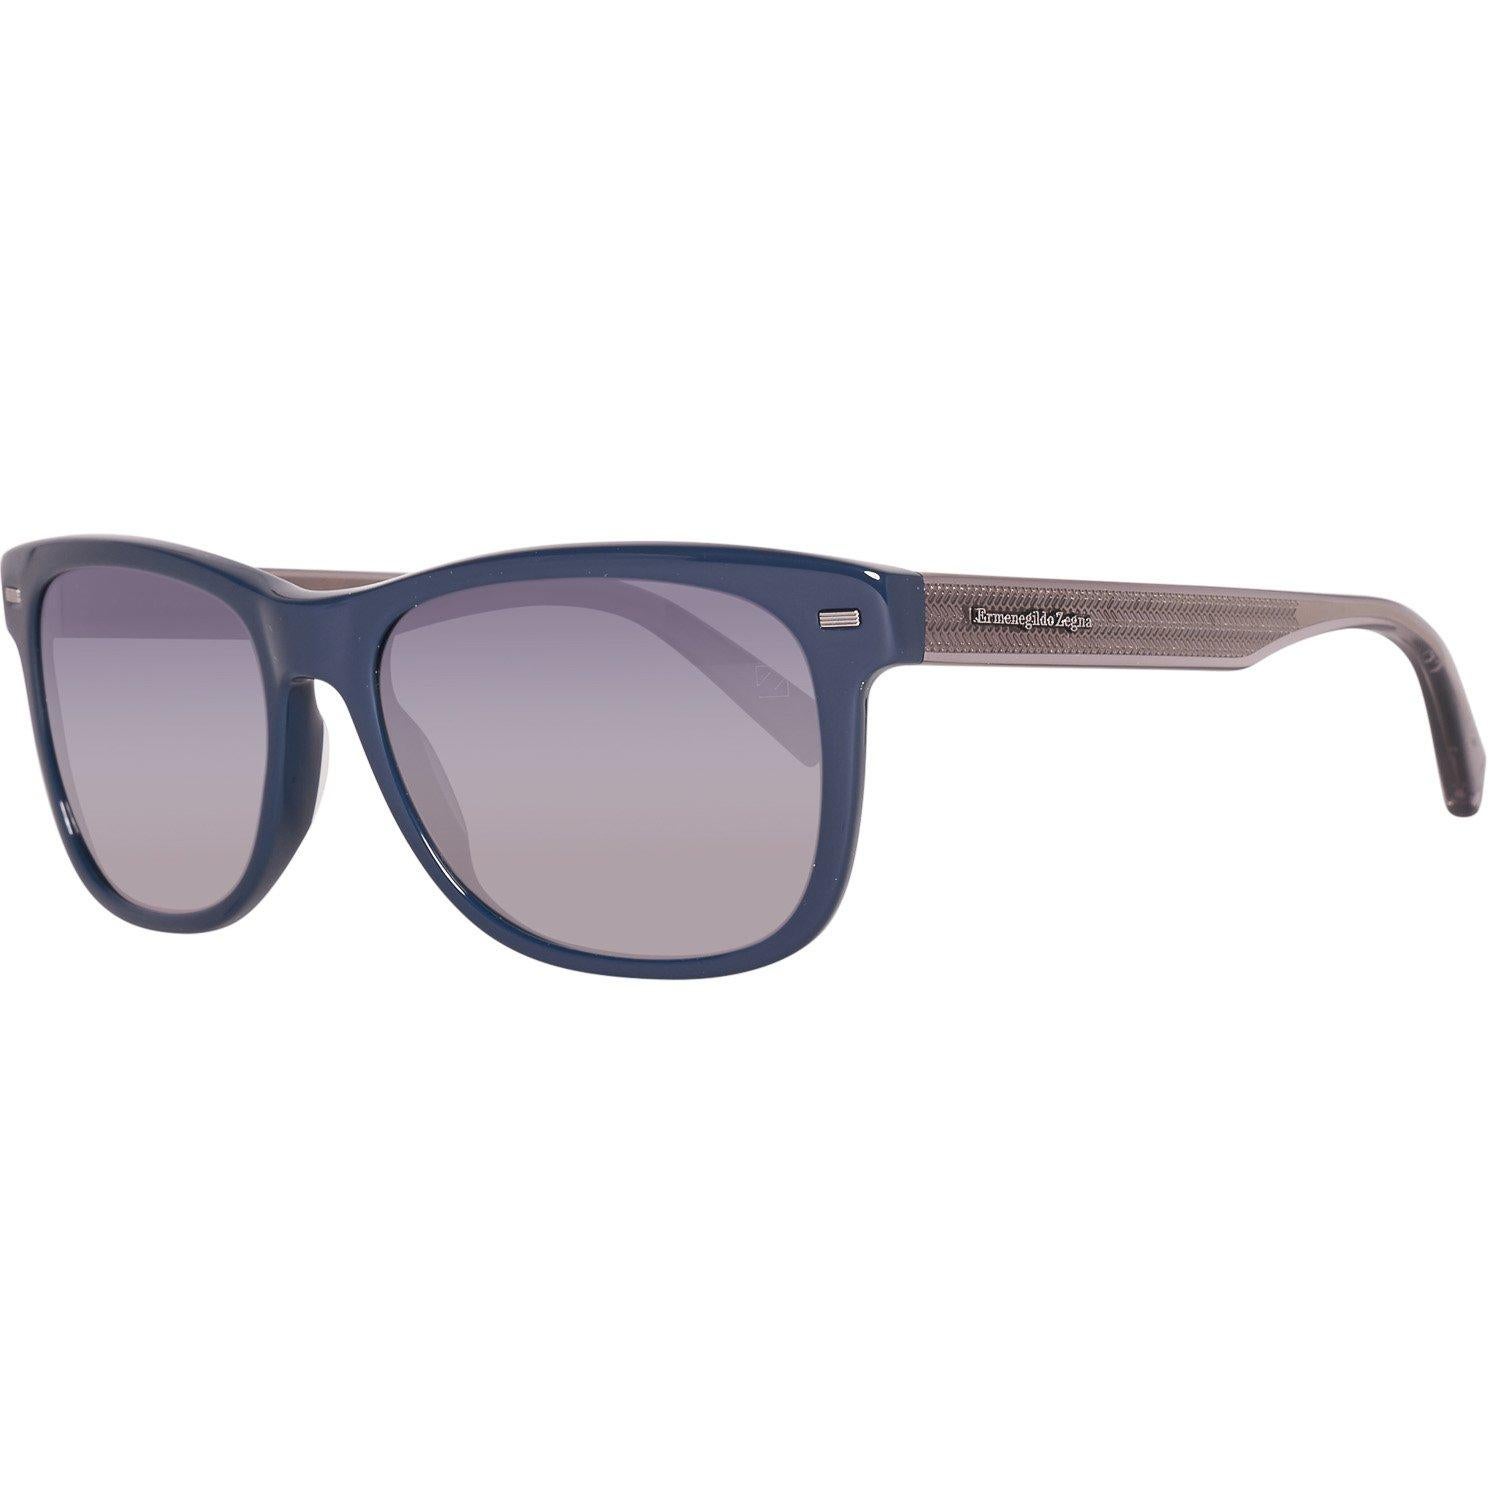 Details

MATERIAL: Acetate

COLOR: Blue

MODEL: EZ0028 5492B

GENDER: Adult Unisex

COUNTRY OF MANUFACTURE: Italy

TYPE: Sunglasses

ORIGINAL CASE?: Yes

STYLE: Trapezium

OCCASION: Casual

FEATURES: Lightweight

LENS COLOR: Blue

LENS TECHNOLOGY: